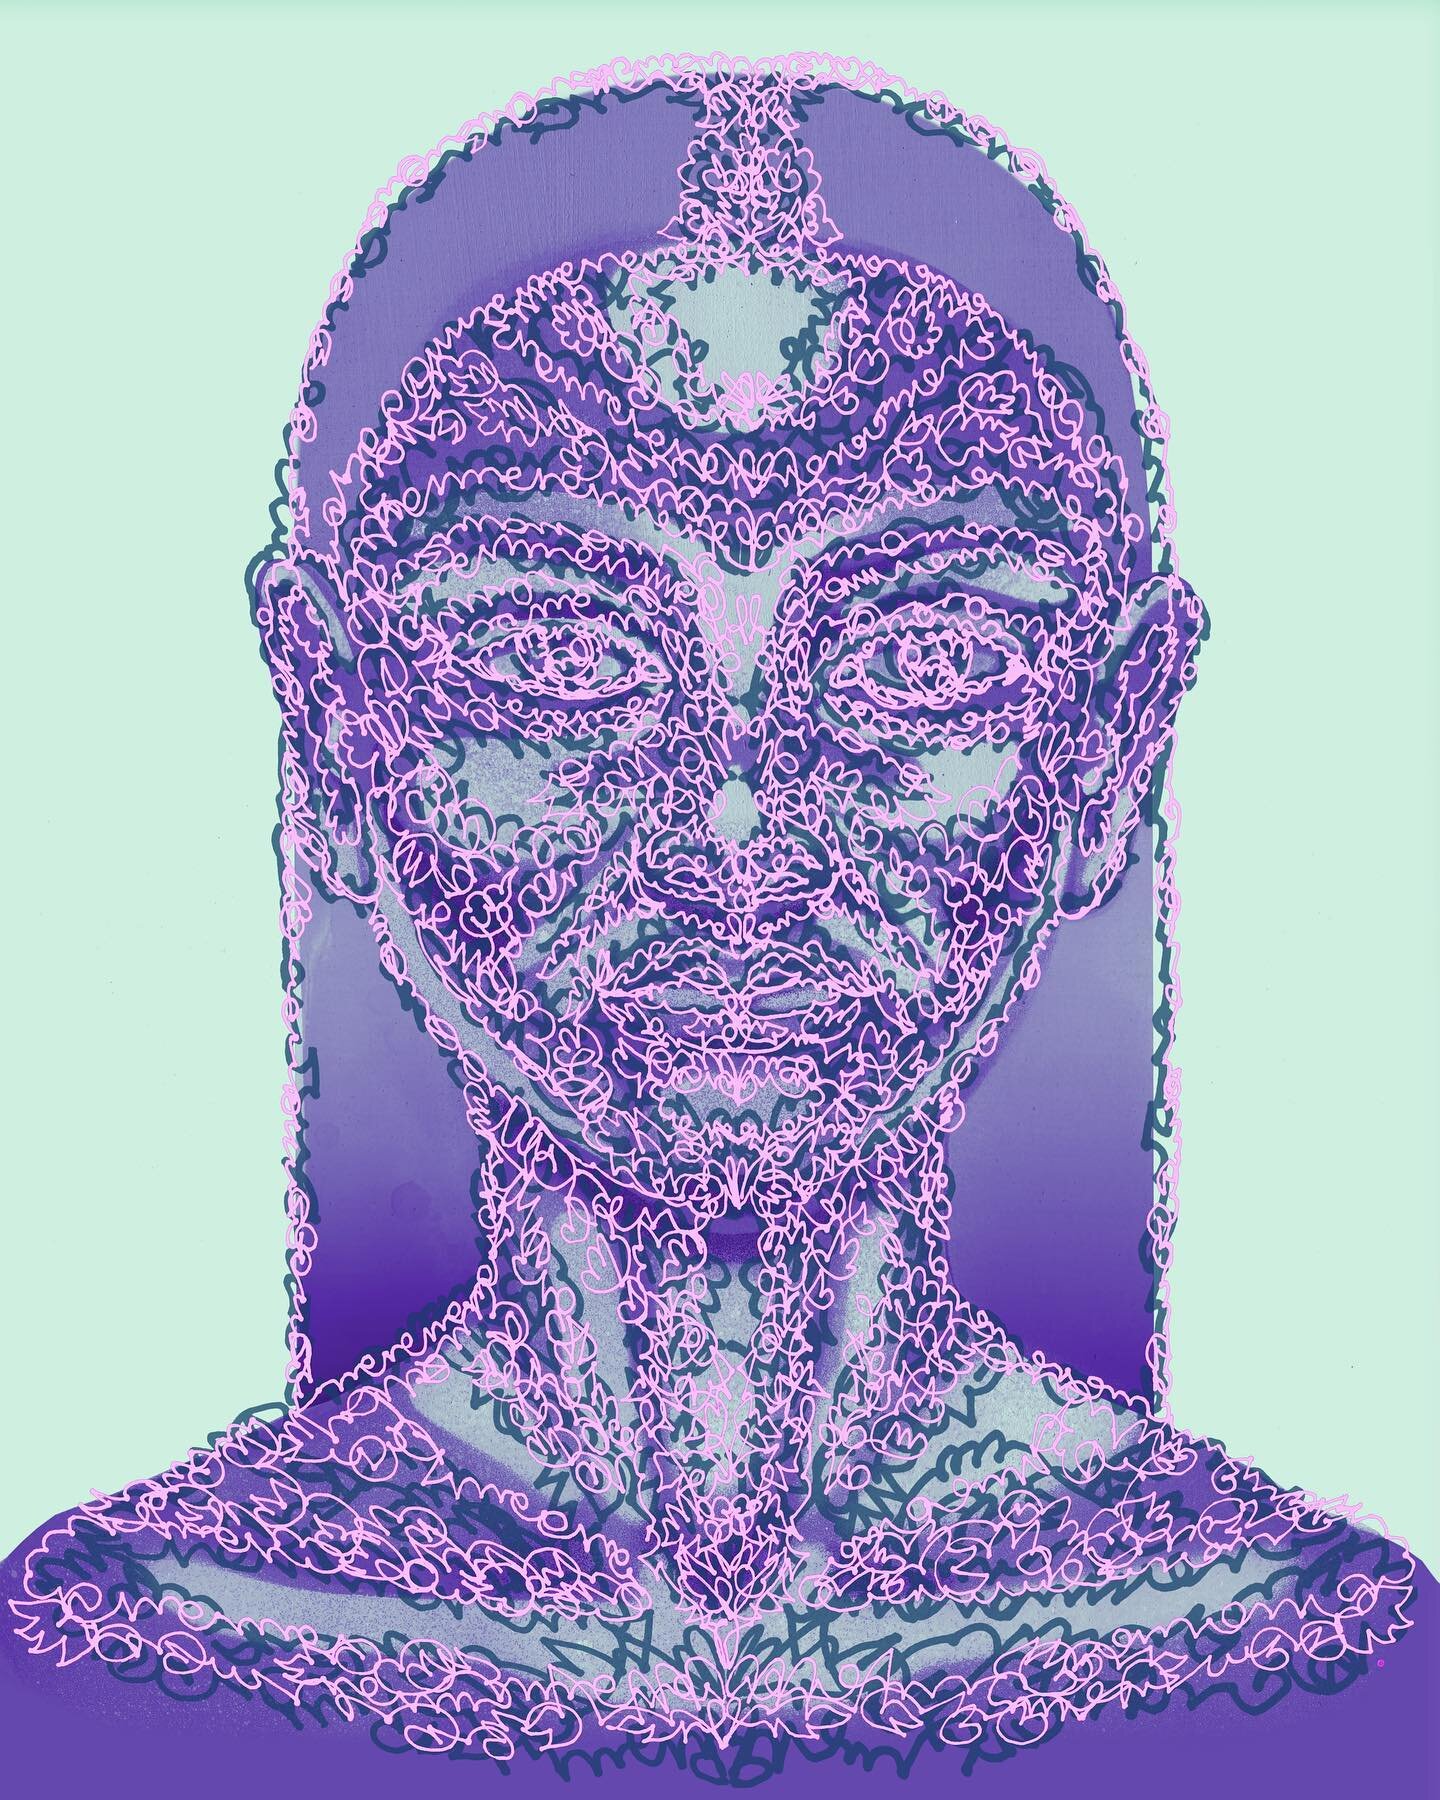 We seem to innately relate and identify with human faces. This peice was created through backwards engineering using a stenciled face, a illustrative value rendering guide, and symmetrical inking. Here are parts of the process to design a the humanoi